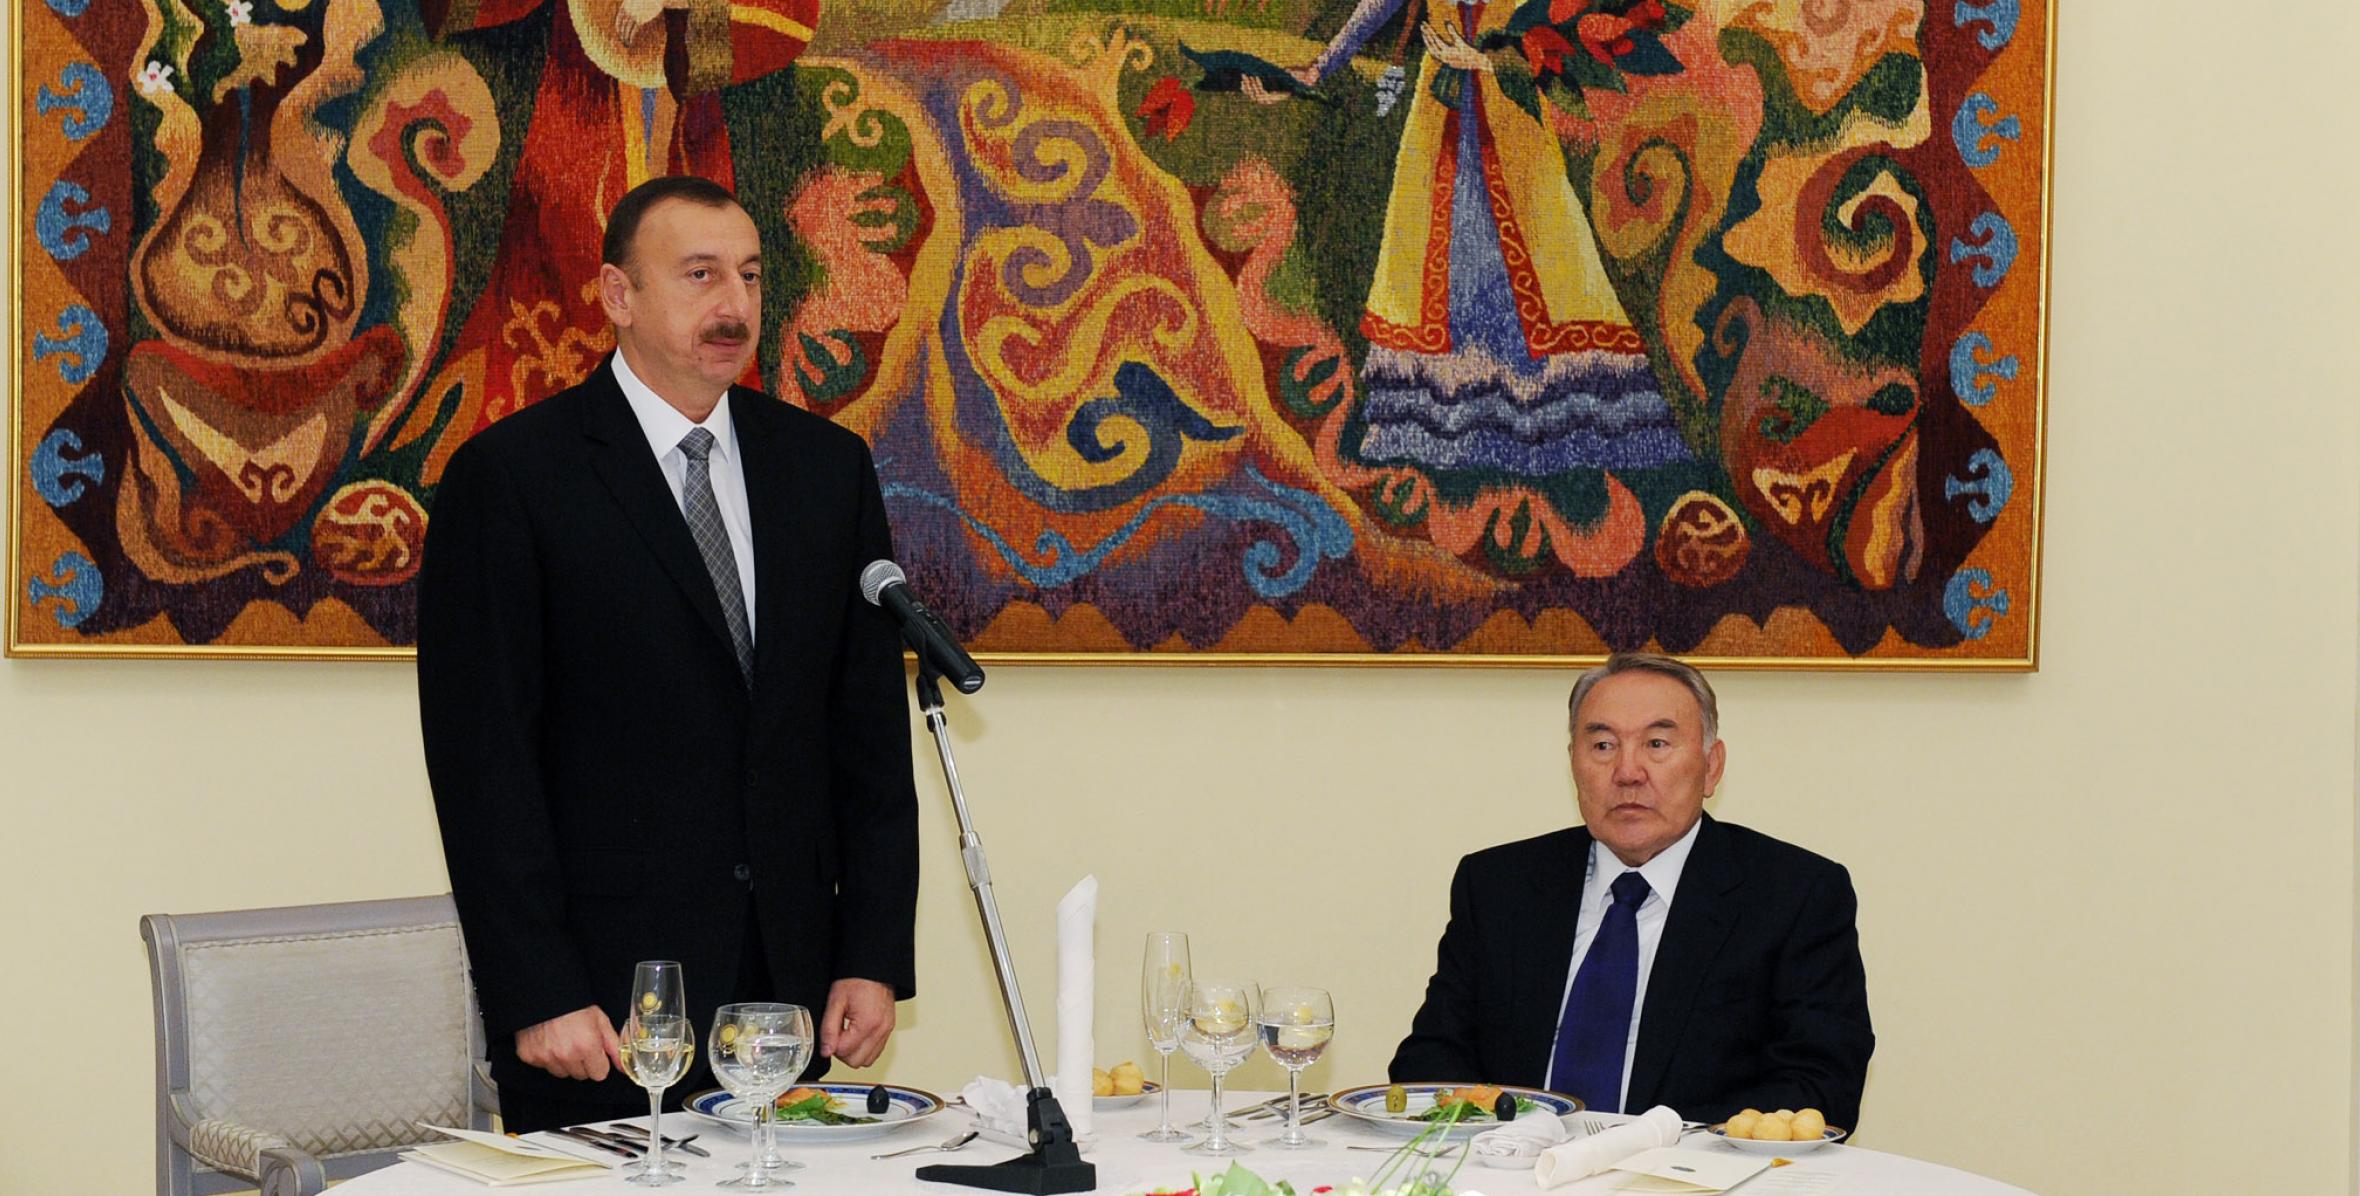 Official dinner reception hosted in honor of Ilham Aliyev